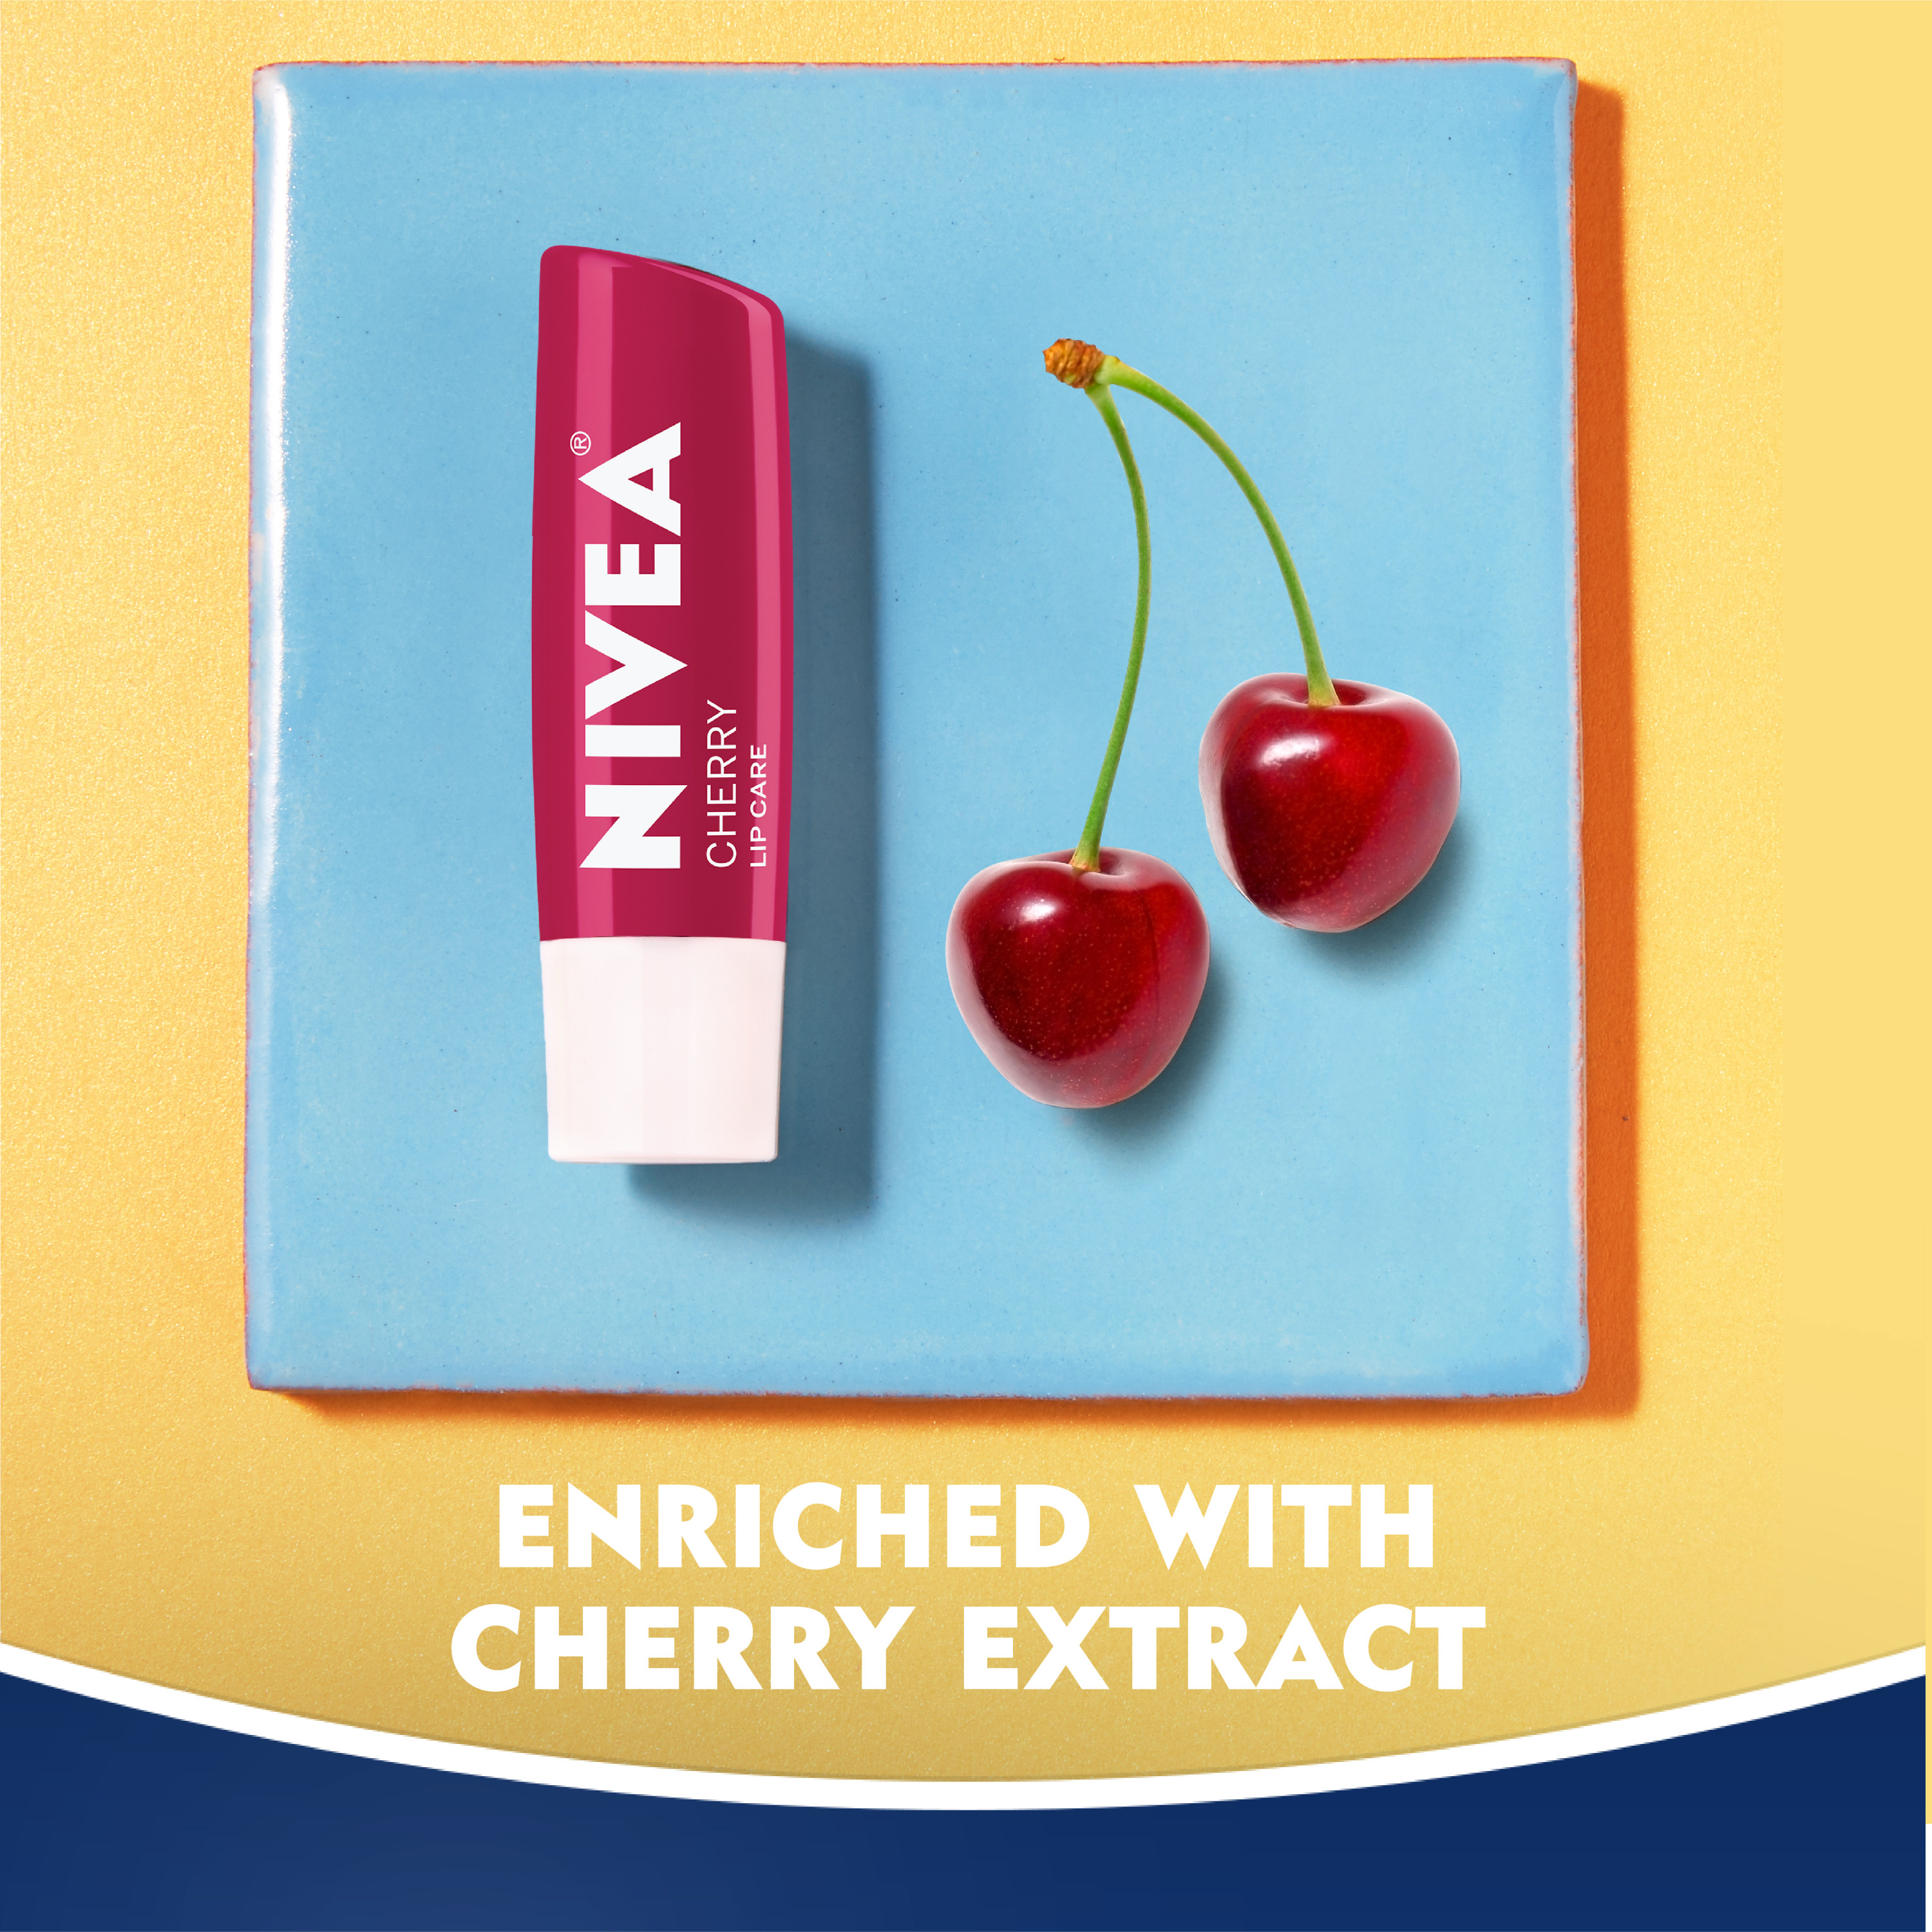 NIVEA Cherry Lip Care 0.17 oz. Carded Pack - image 3 of 5